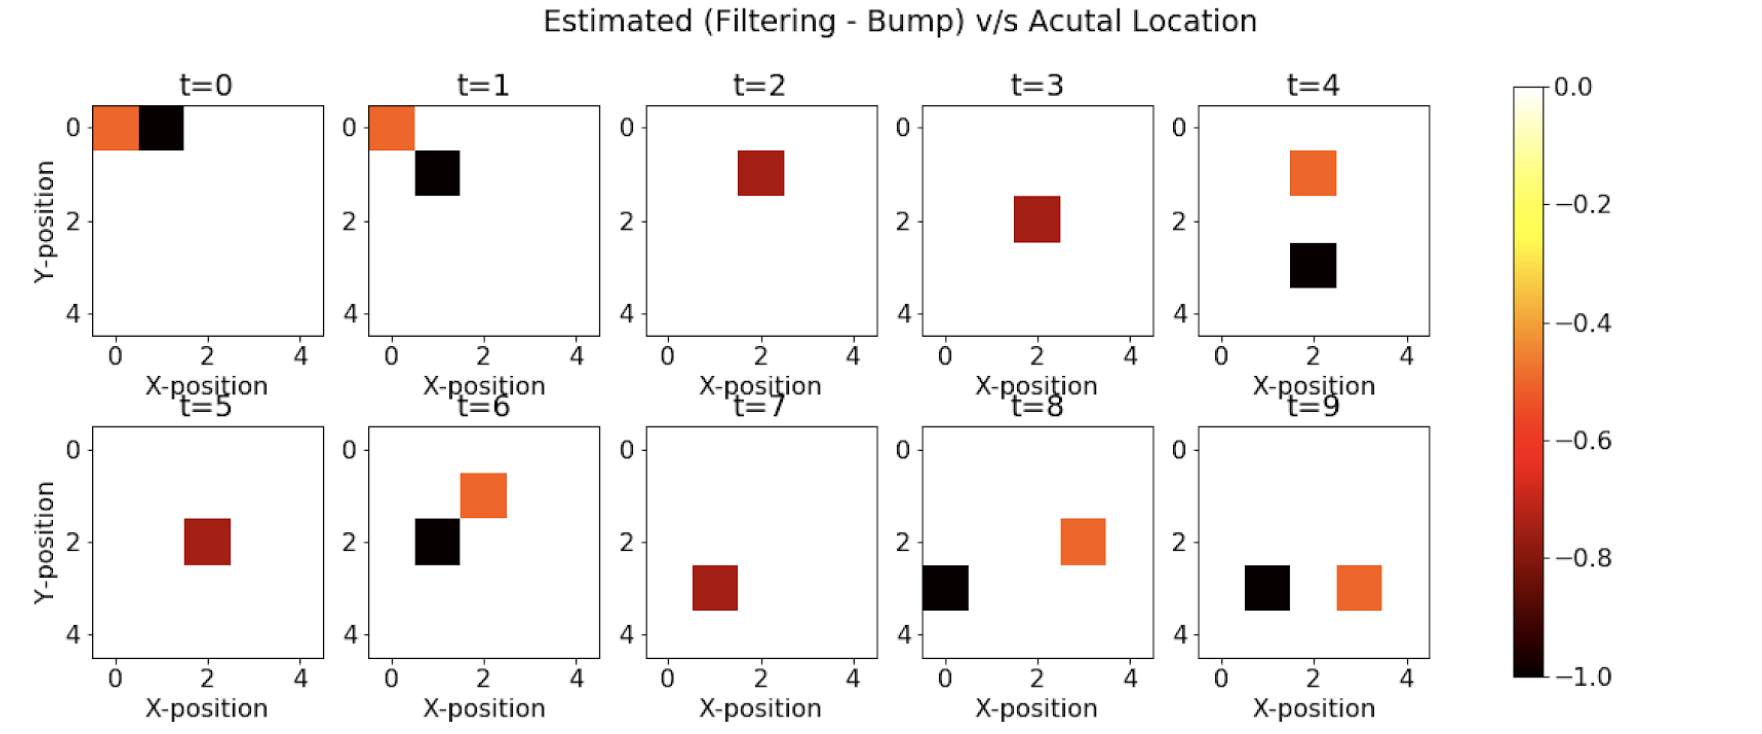 Estimated v/s Actual Location at each timestep (ONLY bump observations)